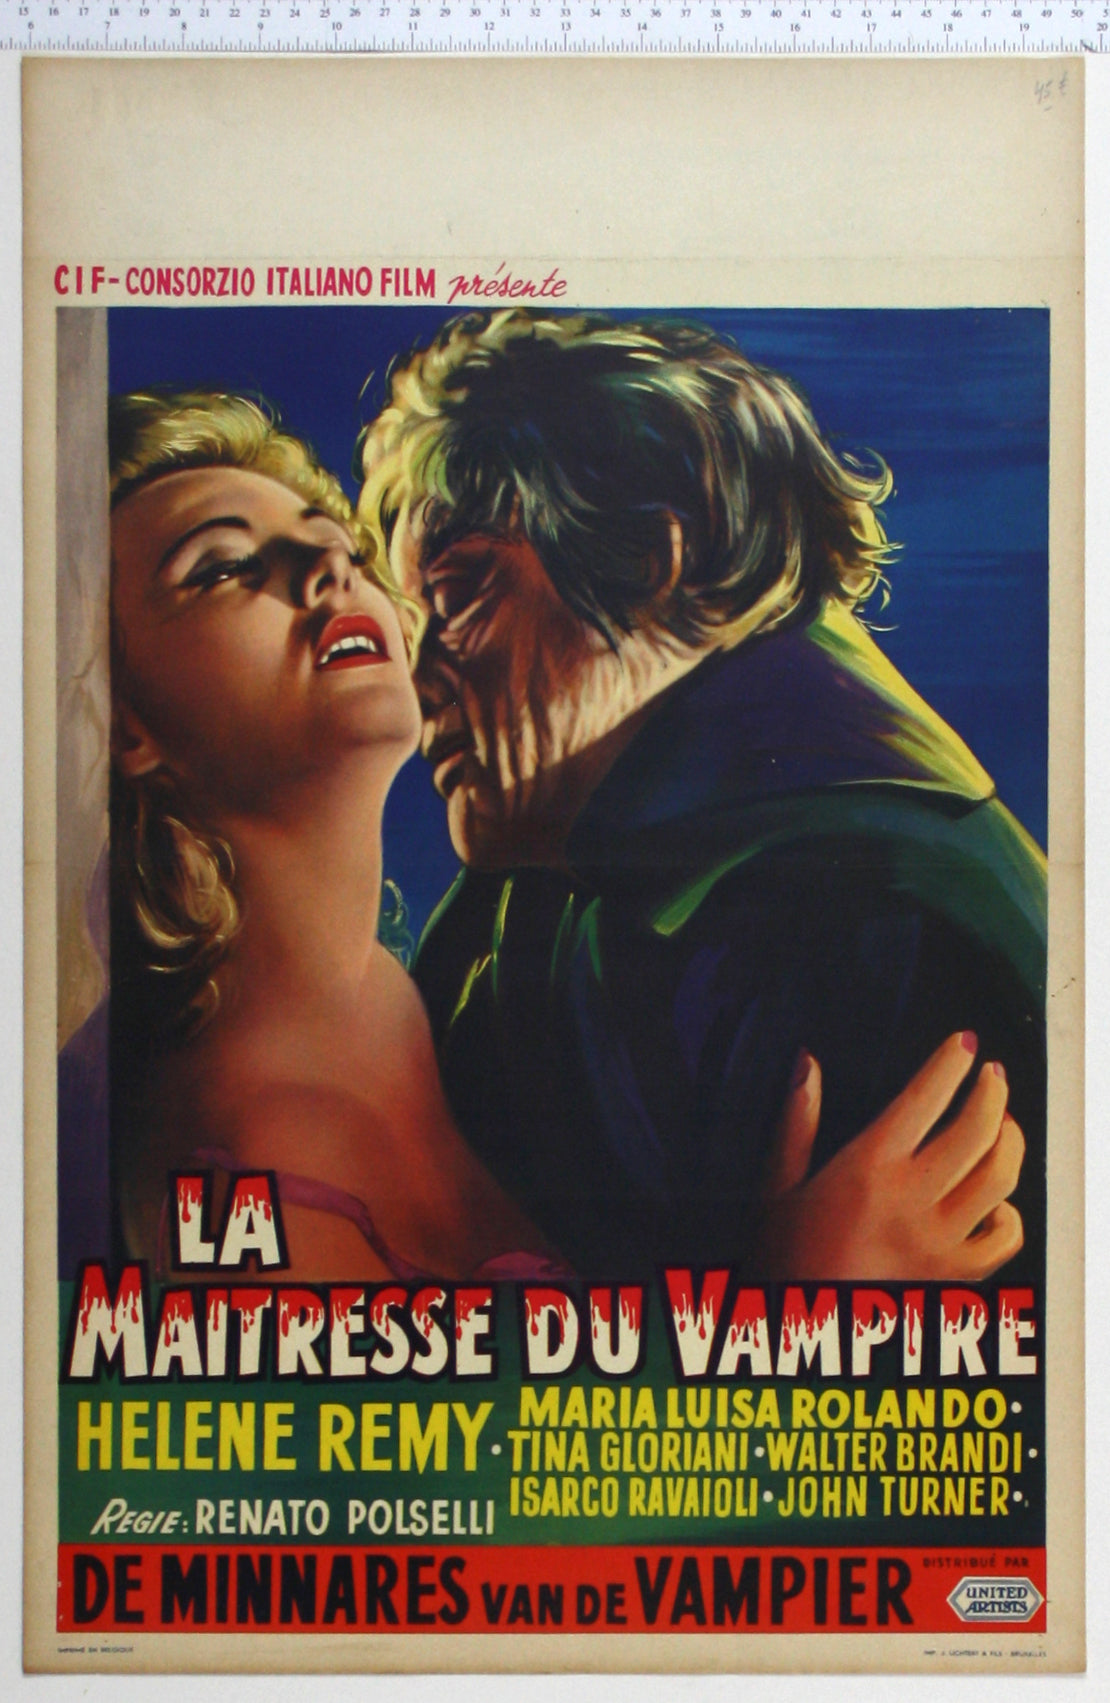 Artwork of beautiful blonde in embrace of hideous, wrinkled vampire about to suck her blood.